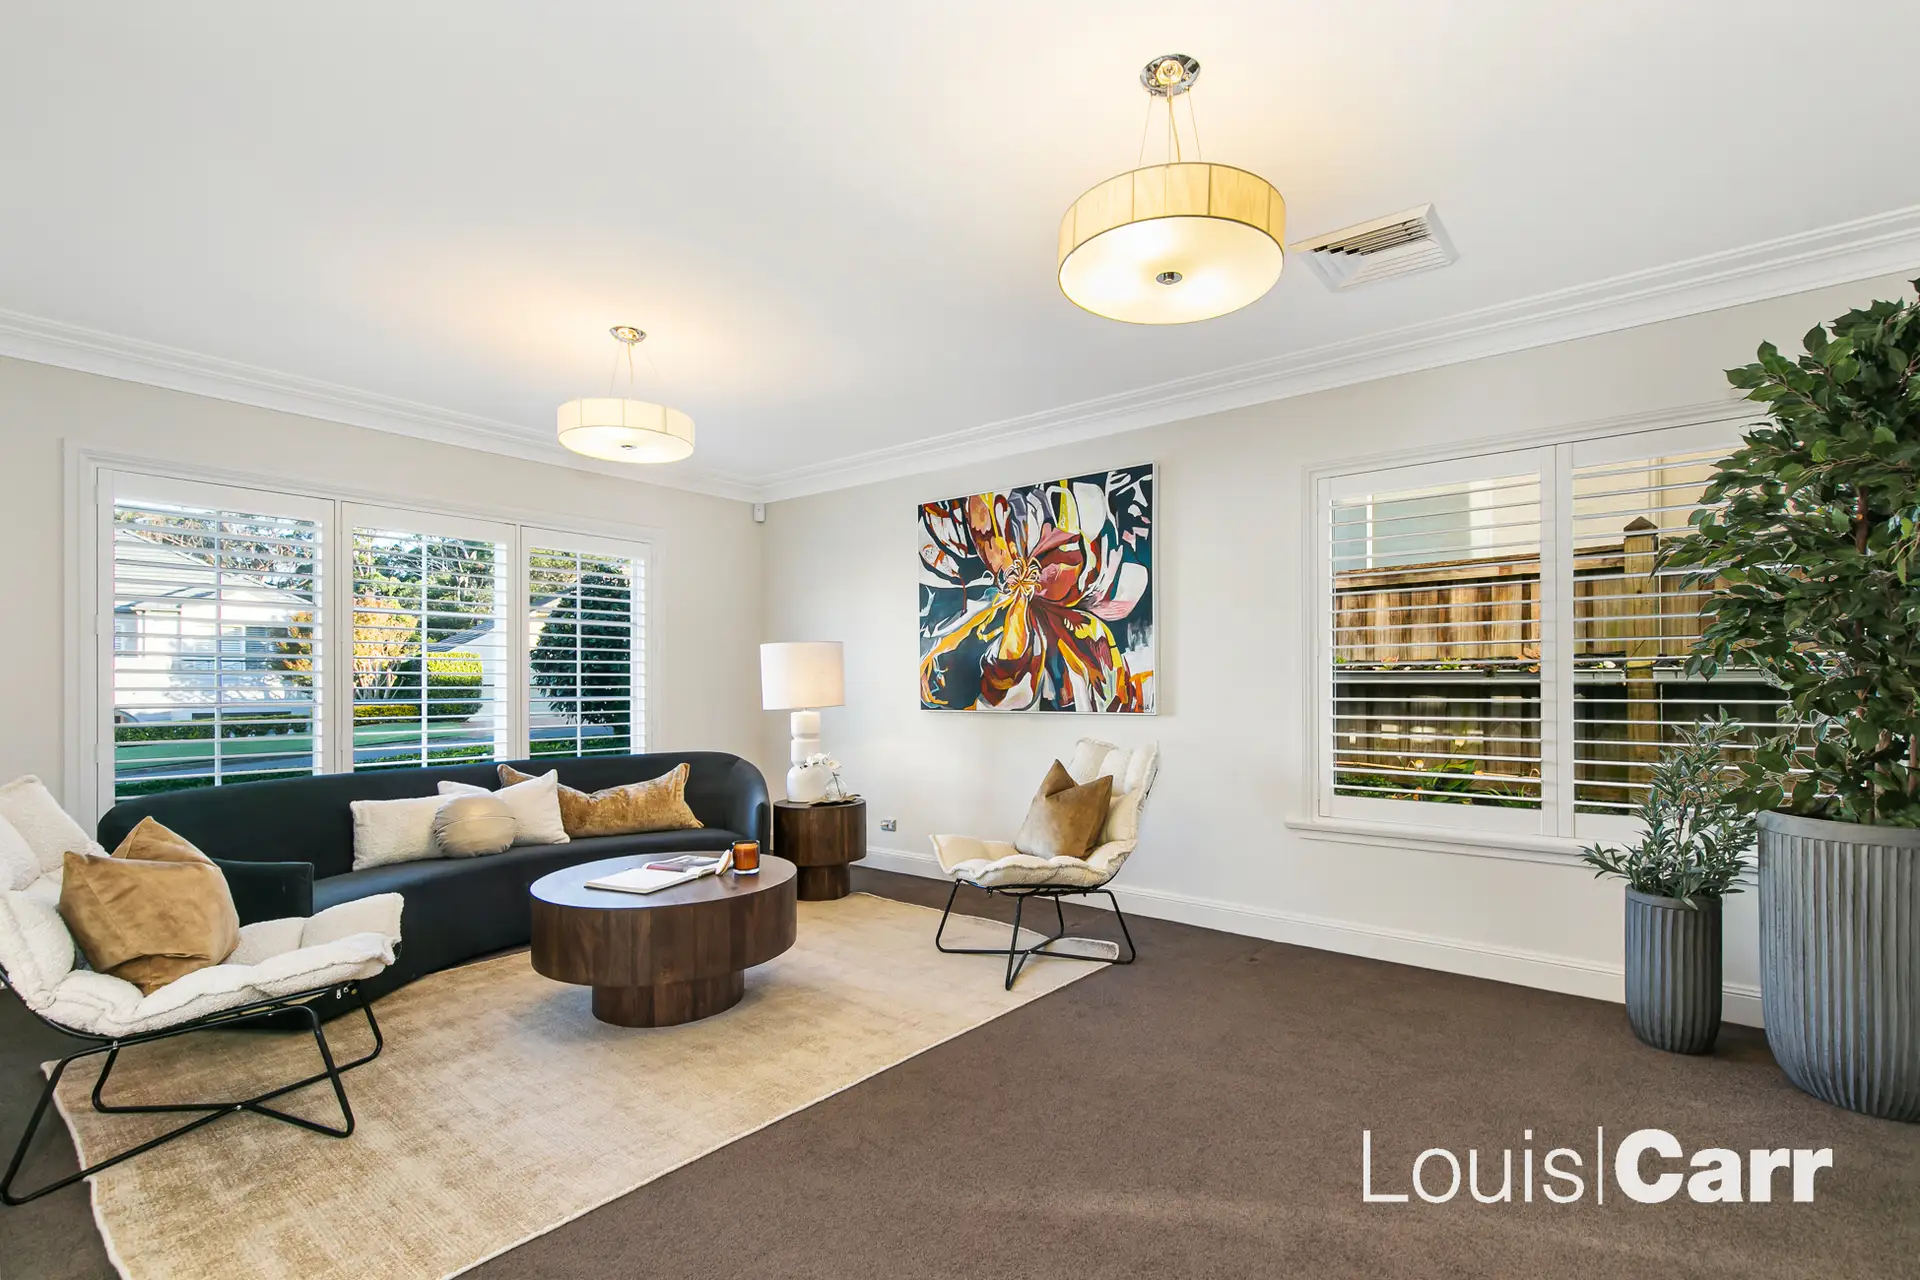 Photo #3: 12 Kambah Place, West Pennant Hills - Sold by Louis Carr Real Estate